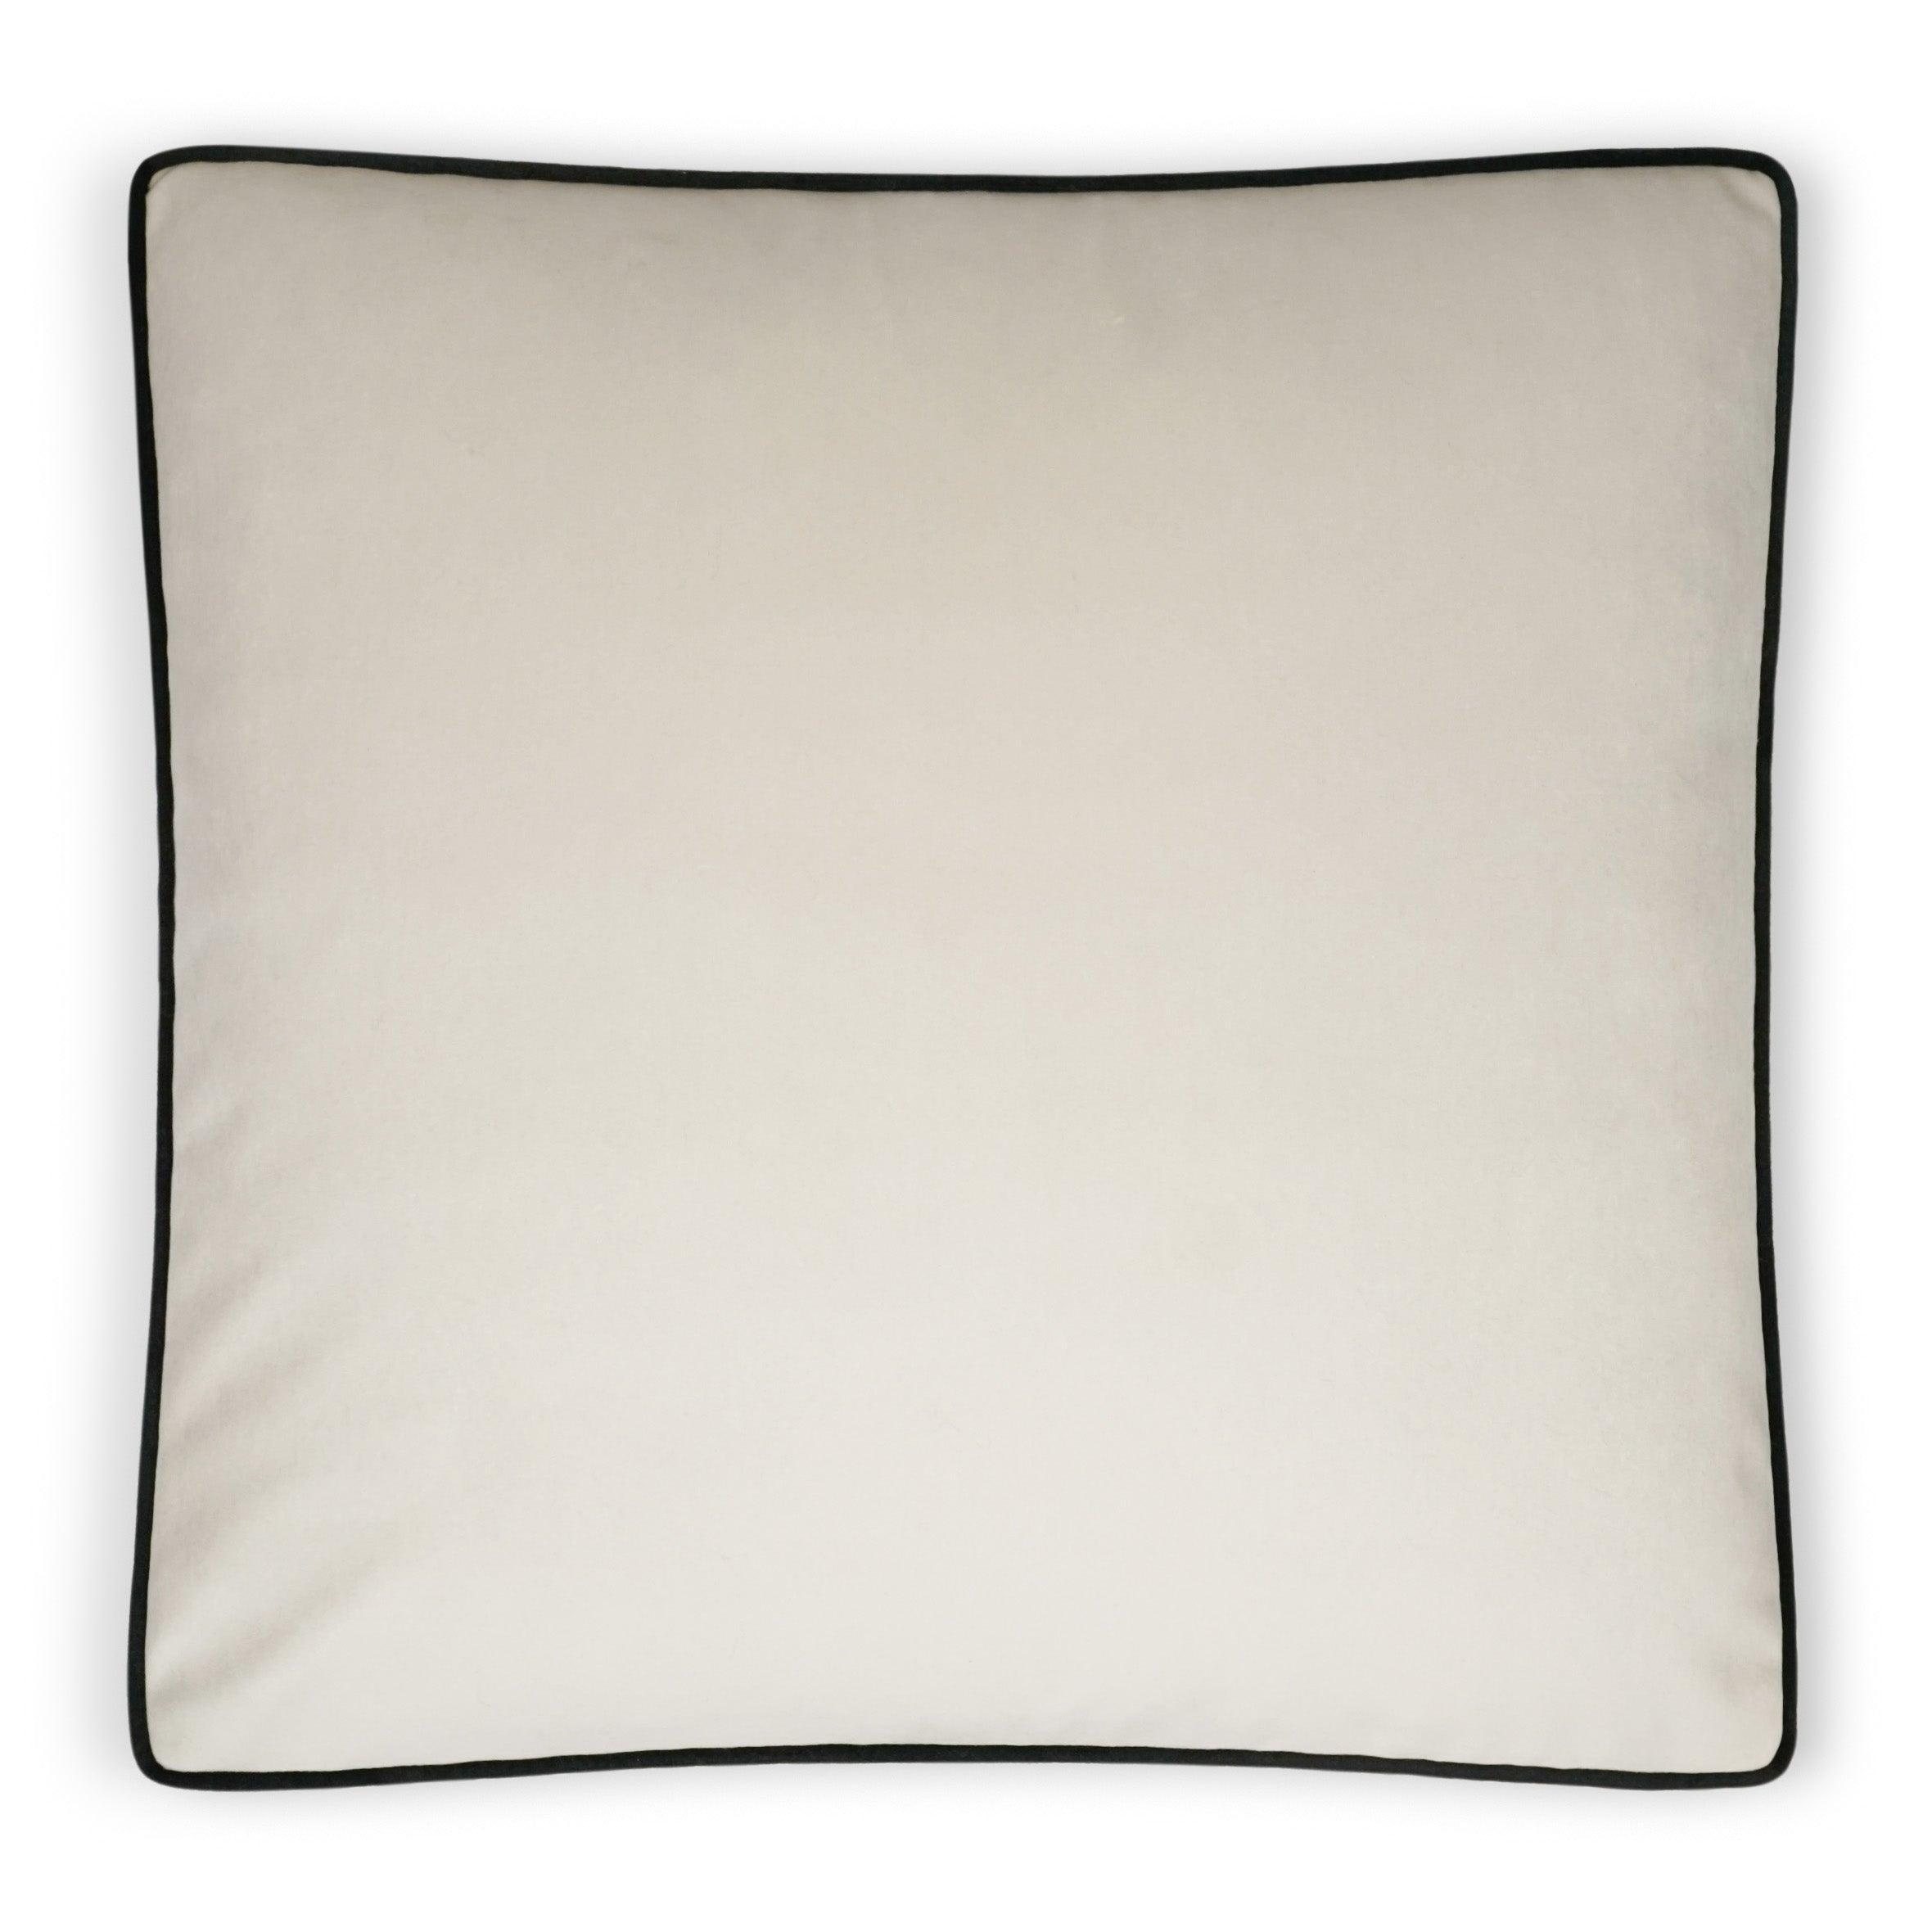 Posh Box Ivory Solid Ivory Large Throw Pillow With Insert - Uptown Sebastian